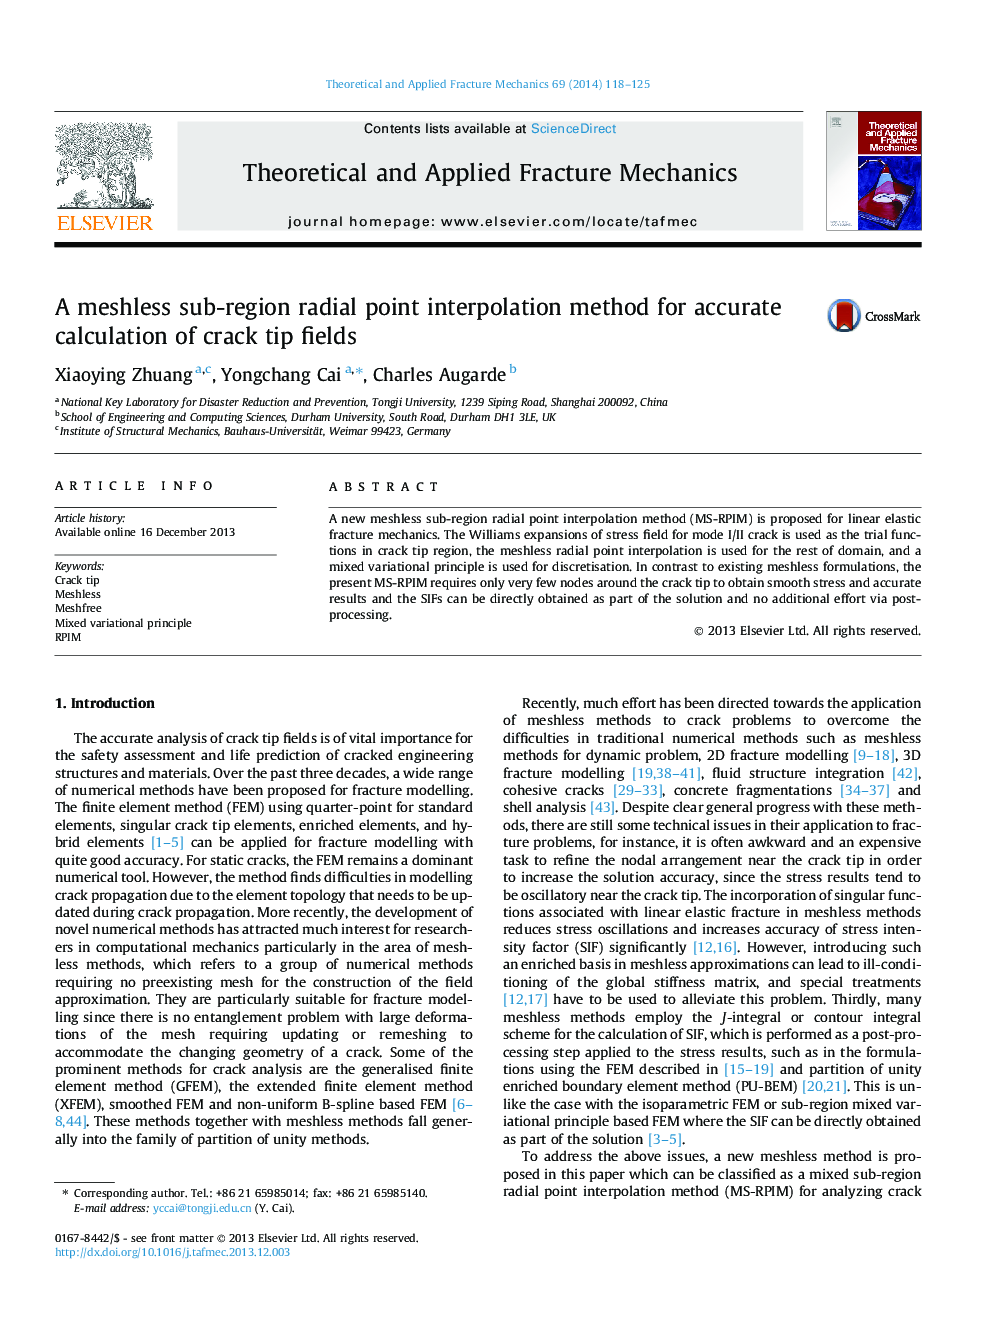 A meshless sub-region radial point interpolation method for accurate calculation of crack tip fields